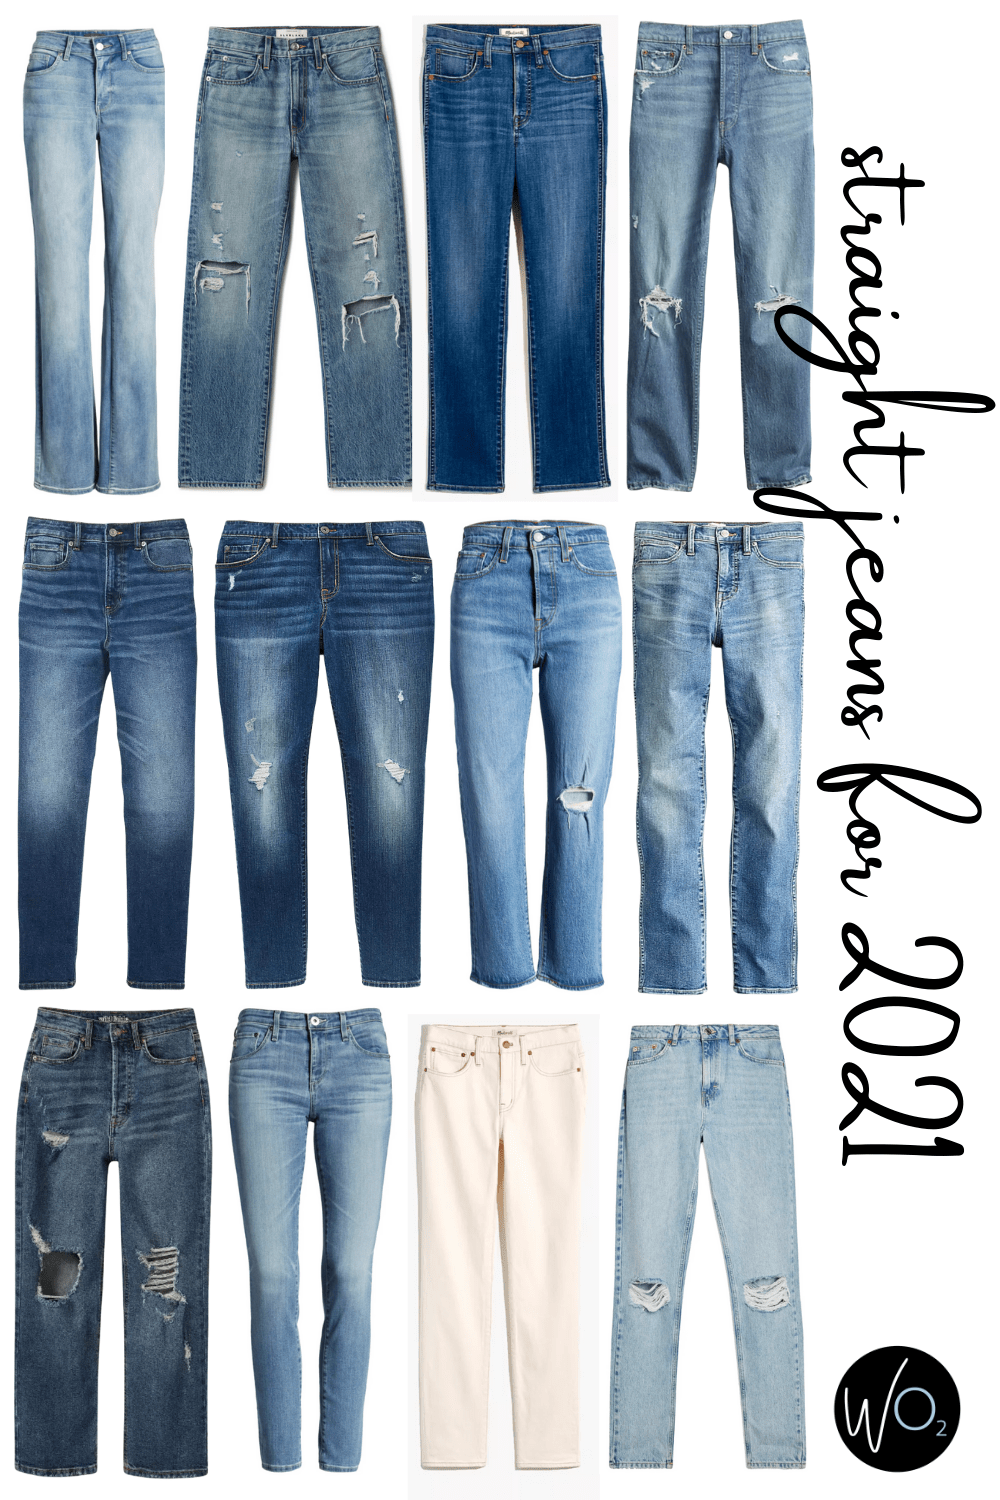 2021 Fashion Trends Jeans